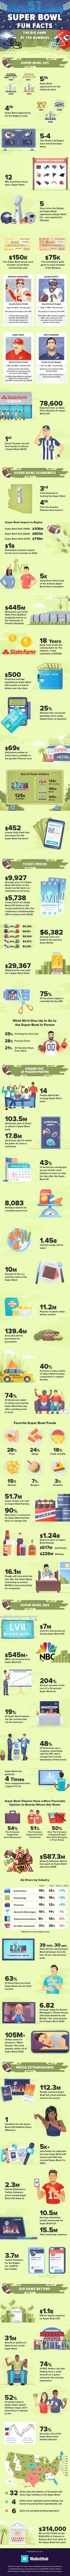 Super Bowl Fun Facts – The Big Game By The Numbers